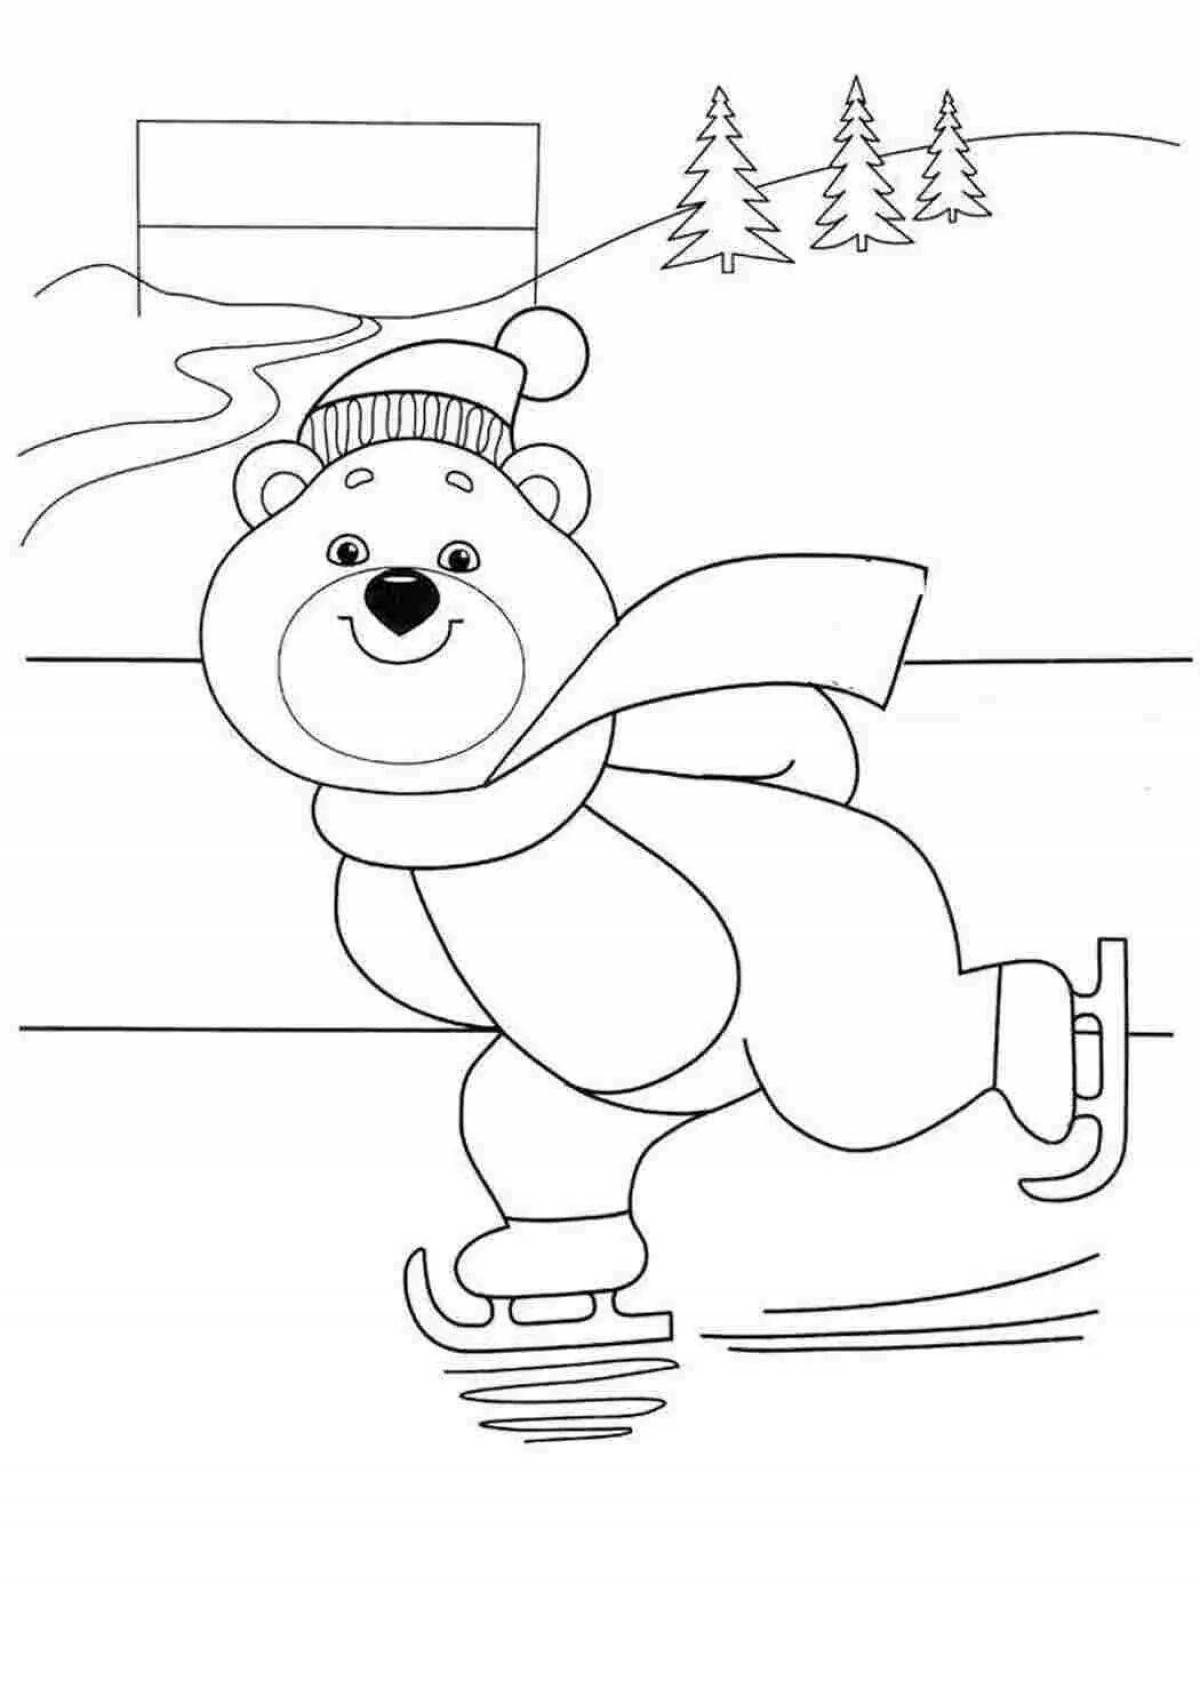 Colouring funny winter olympic games